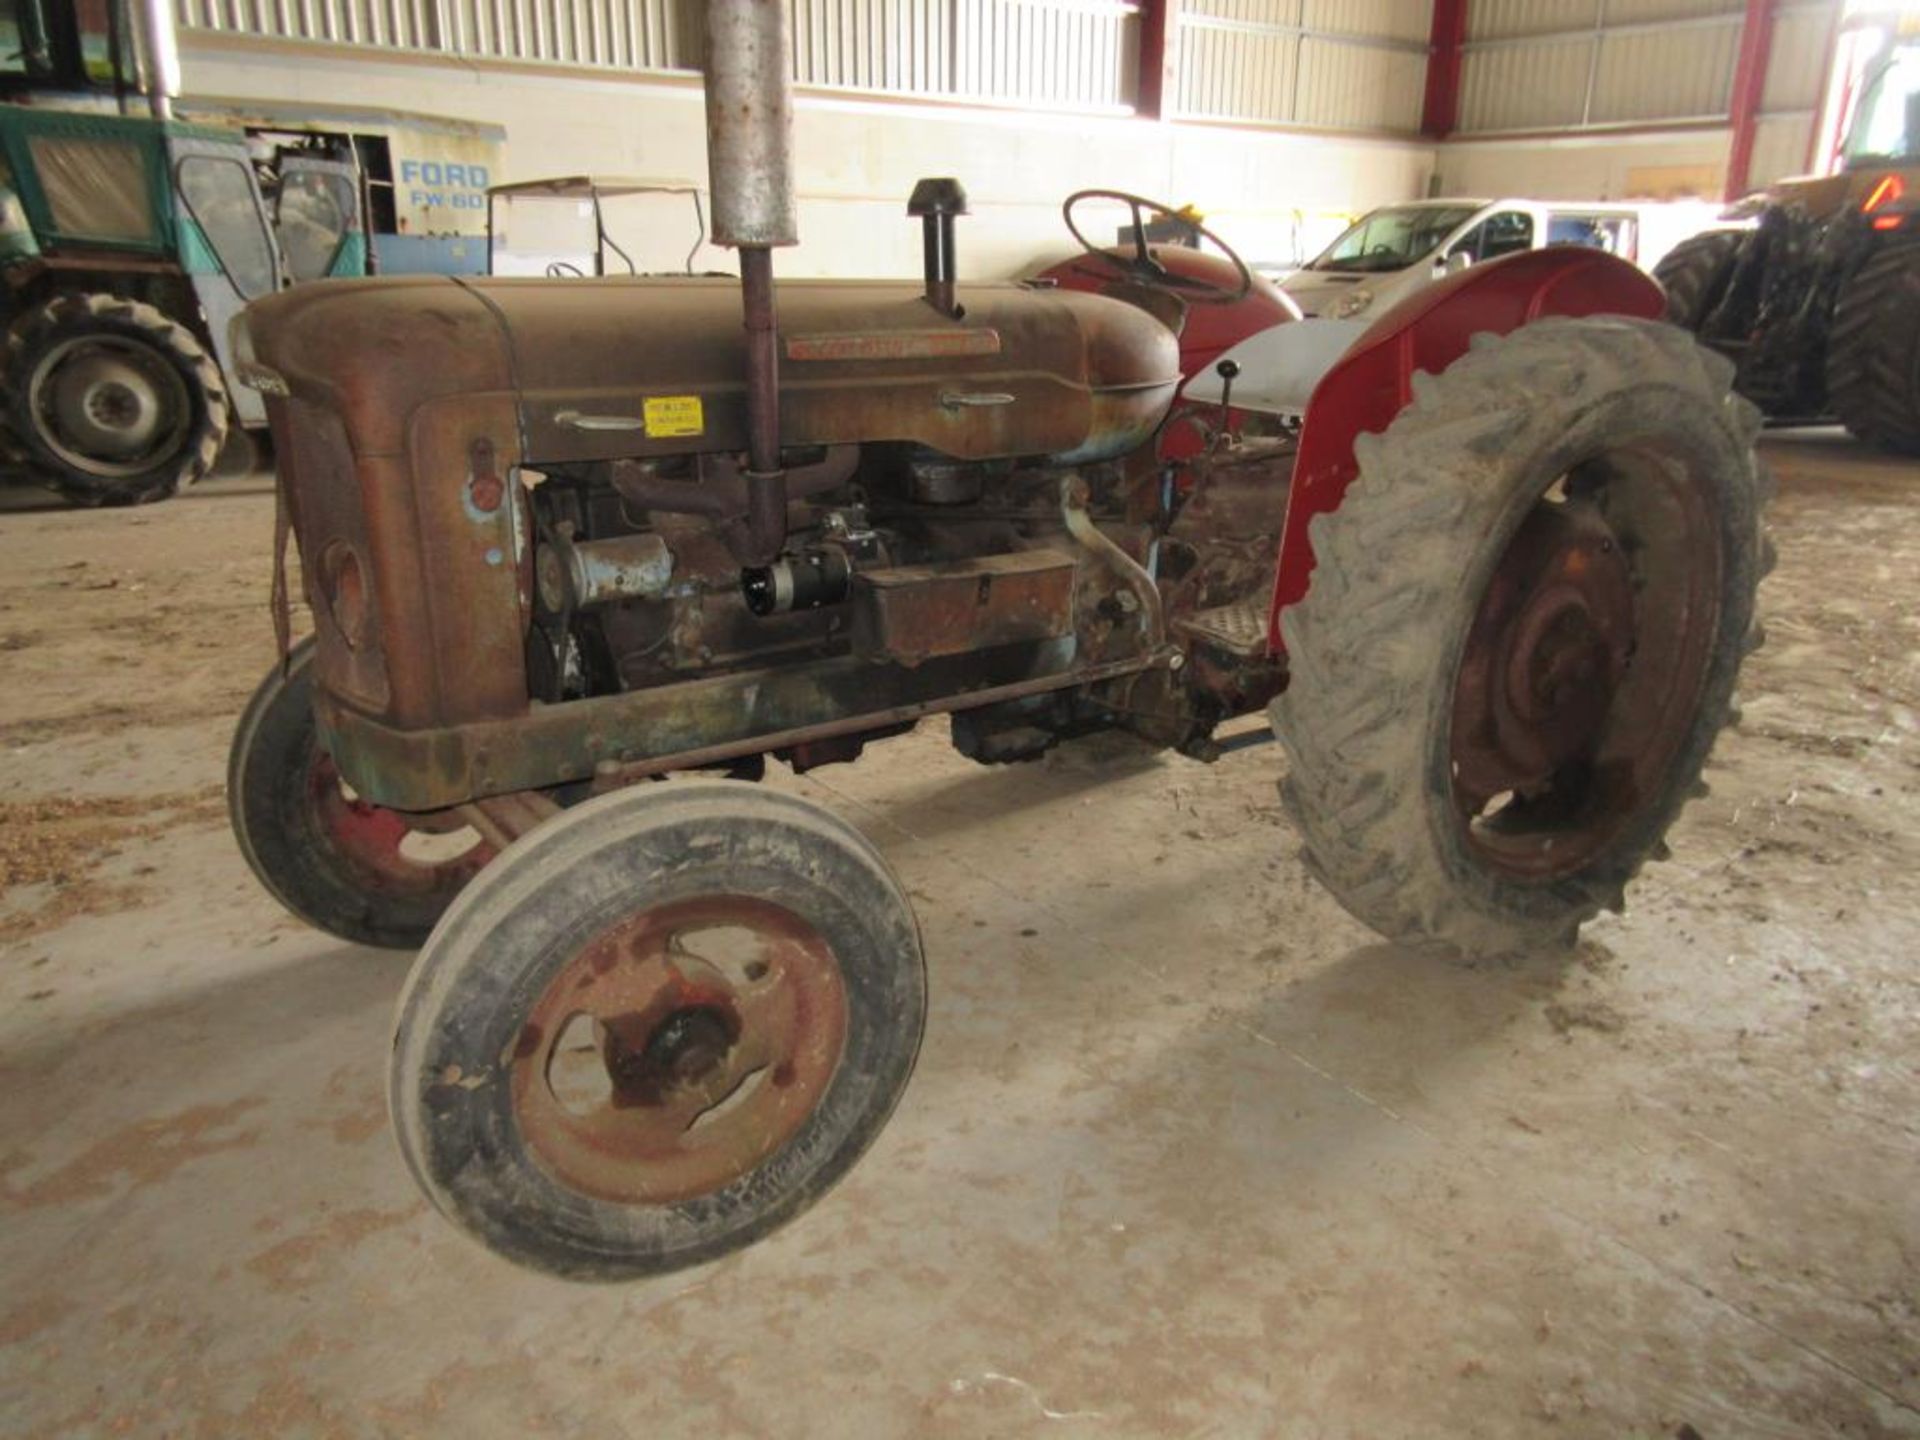 FORDSON Super Major 4cylinder diesel TRACTOR Fitted with side belt pulley, rear linkage and new rear - Image 2 of 3